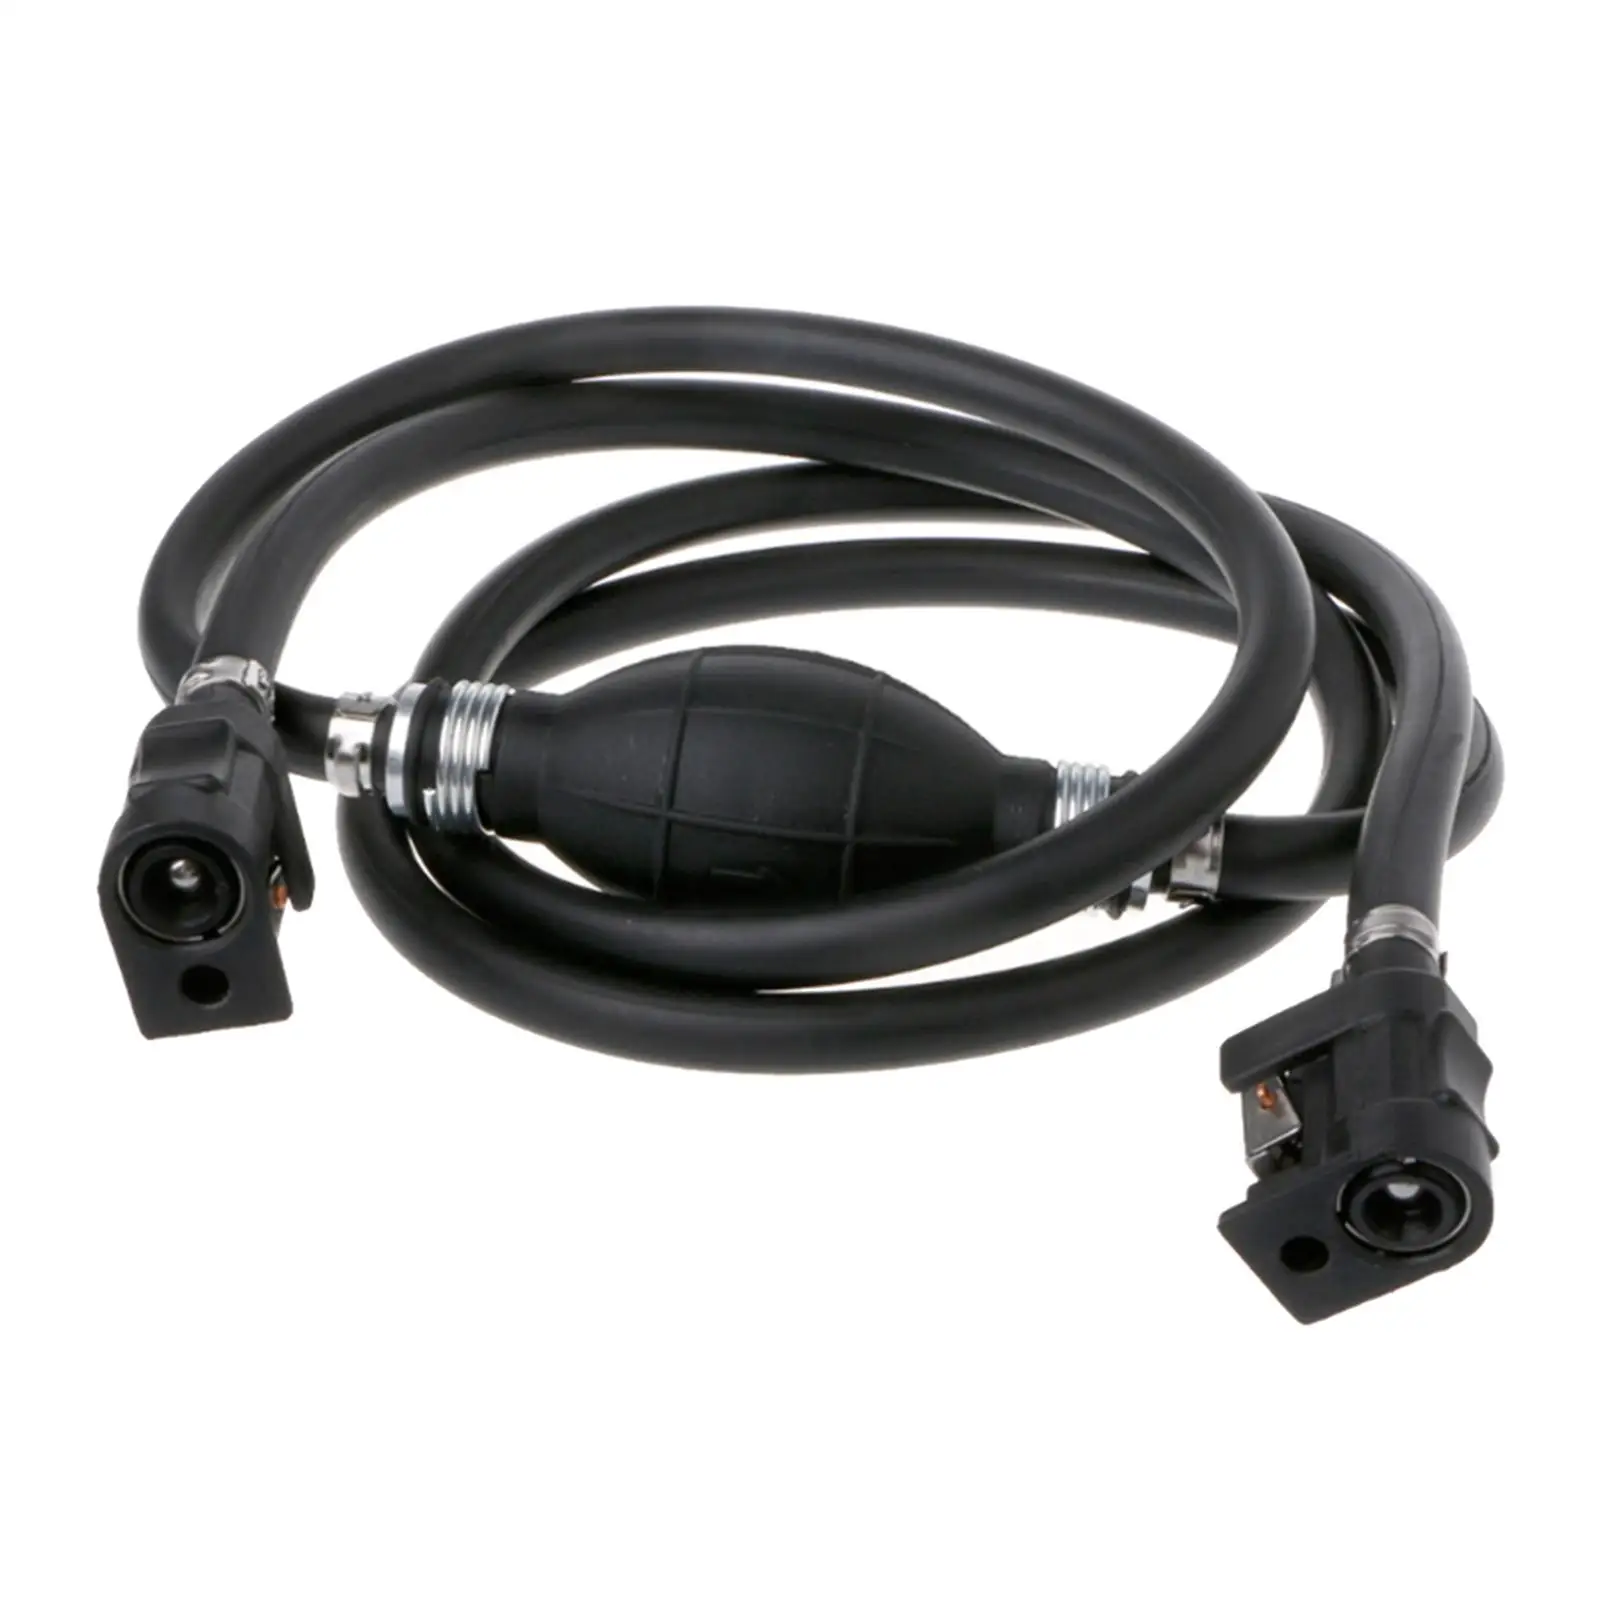 Boat Fuel Lines for (, , OMC, Universal) Engine Options Hose 9FT